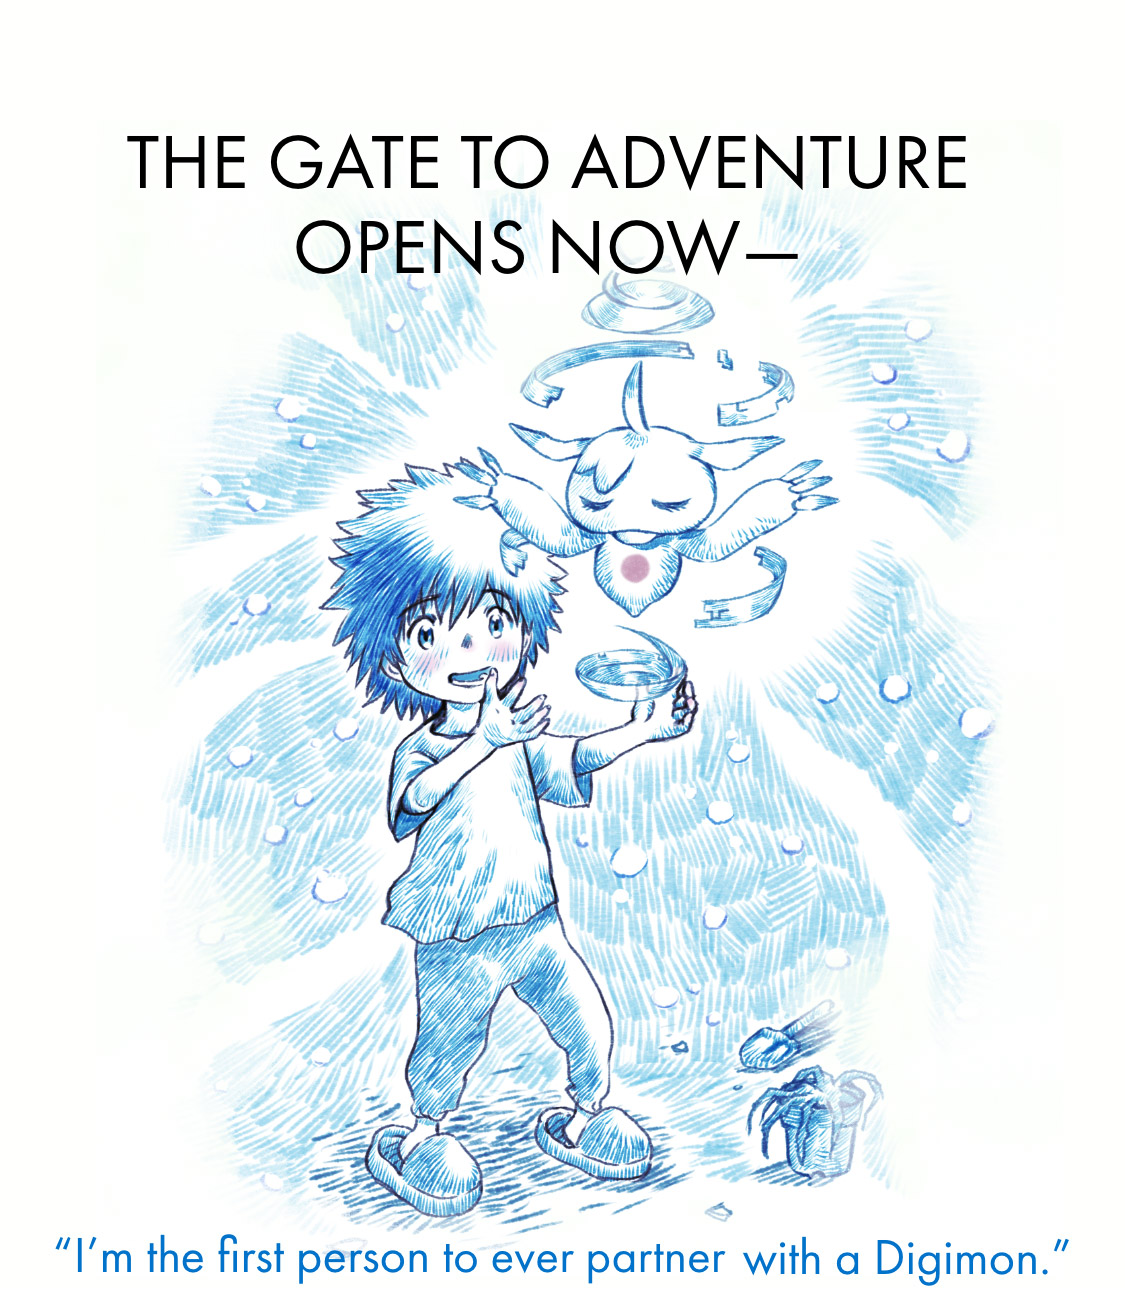 「Digimon Adventure 02 THE BEGINNING」Official websiteI'm the first person to ever partner with a Digimon.The door to adventure opens now.